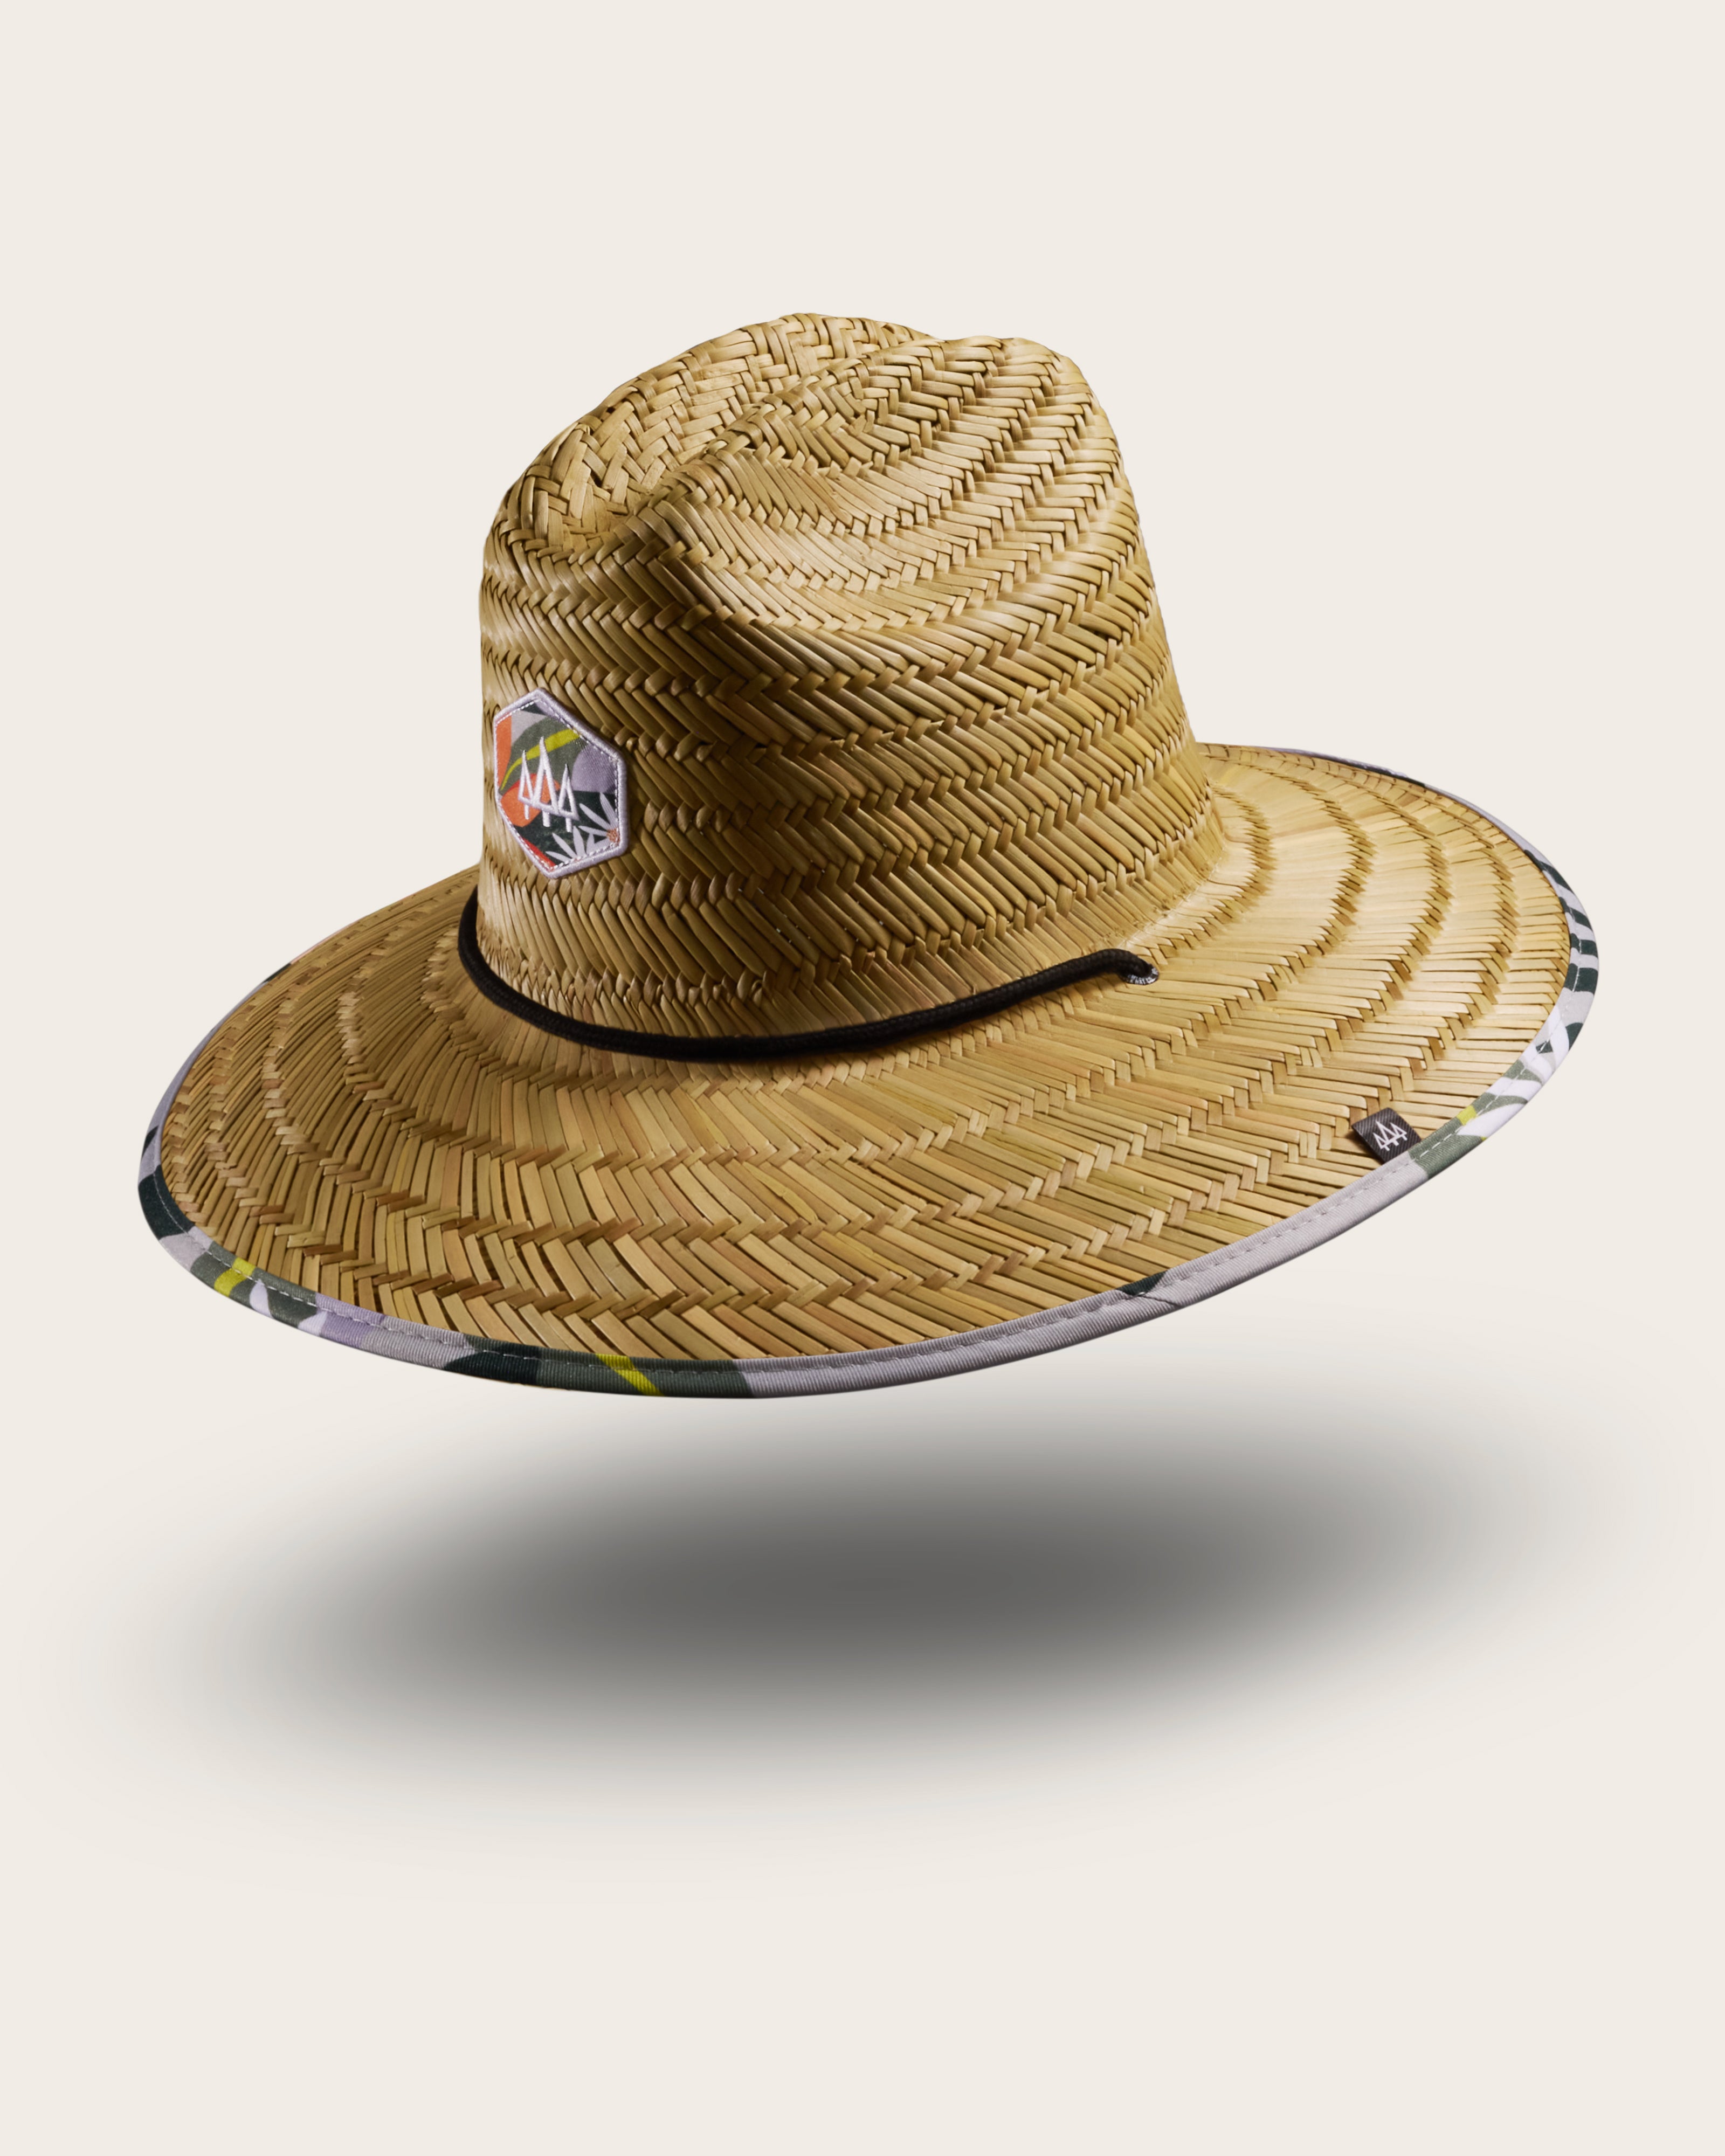 Hemlock Barbados straw lifeguard hat with orange floral print with patch